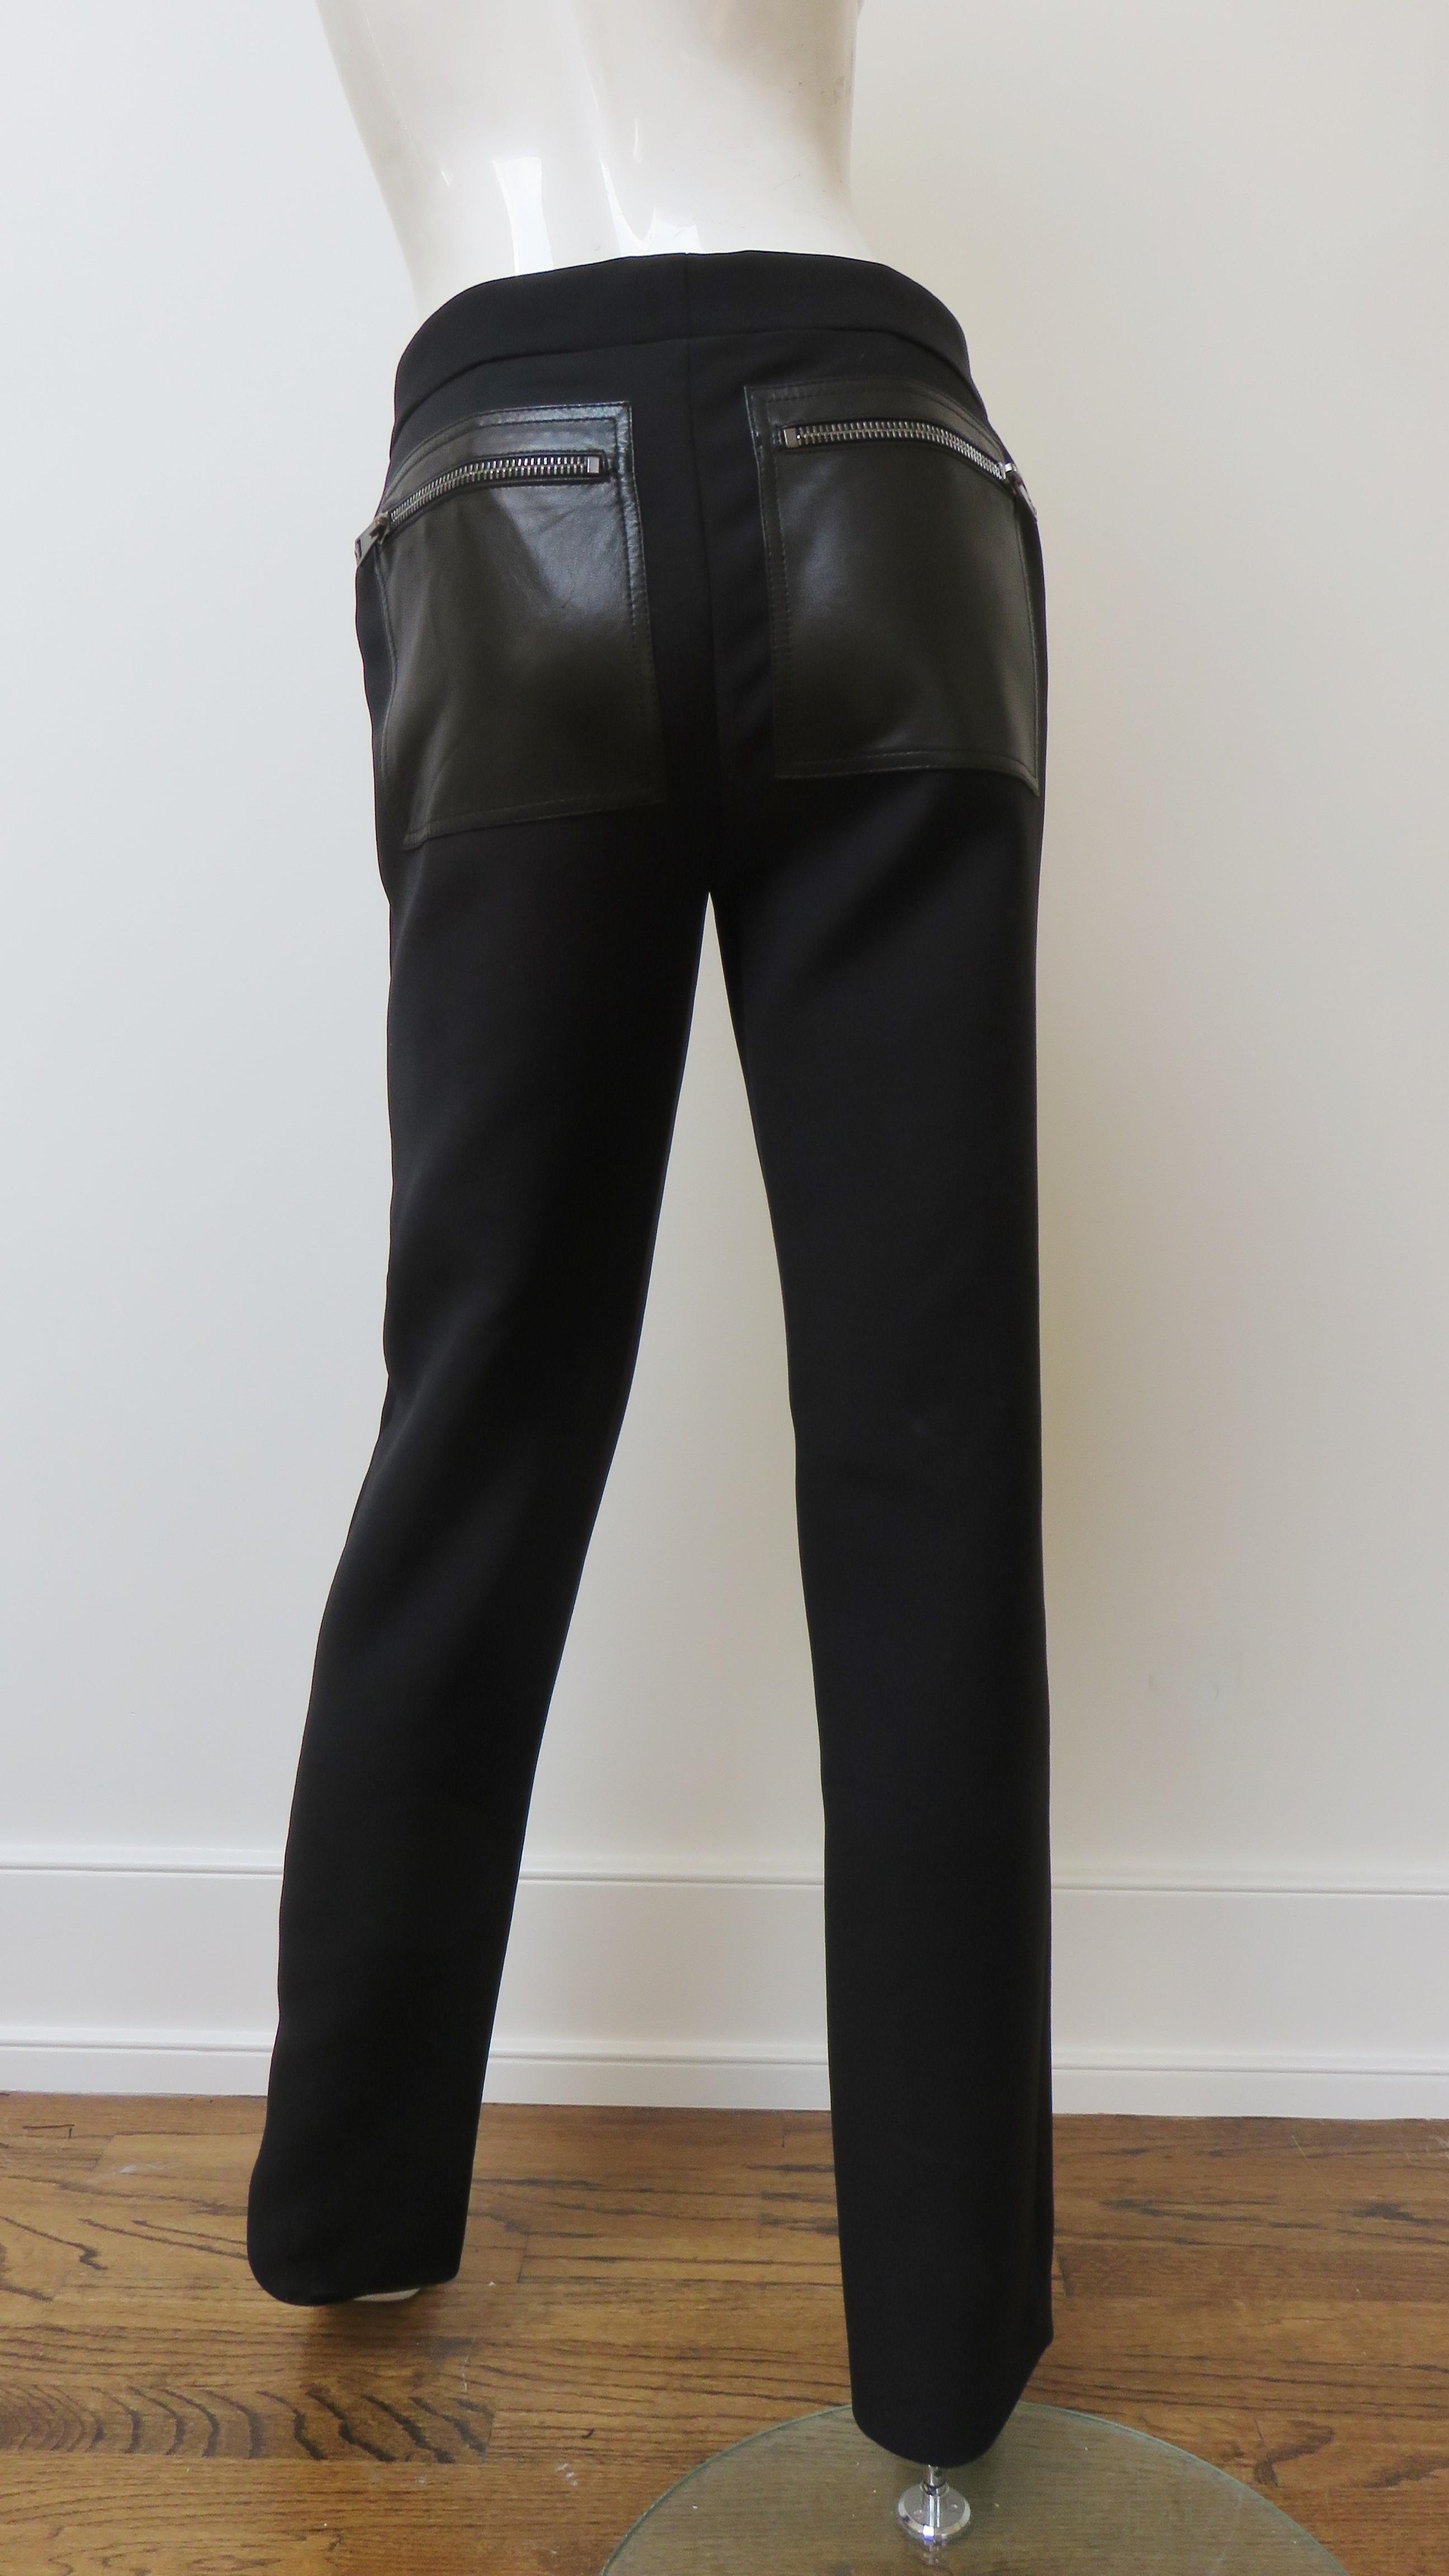 Tom Ford for Gucci Pants with Zipper Legs A/W 2001 For Sale 5